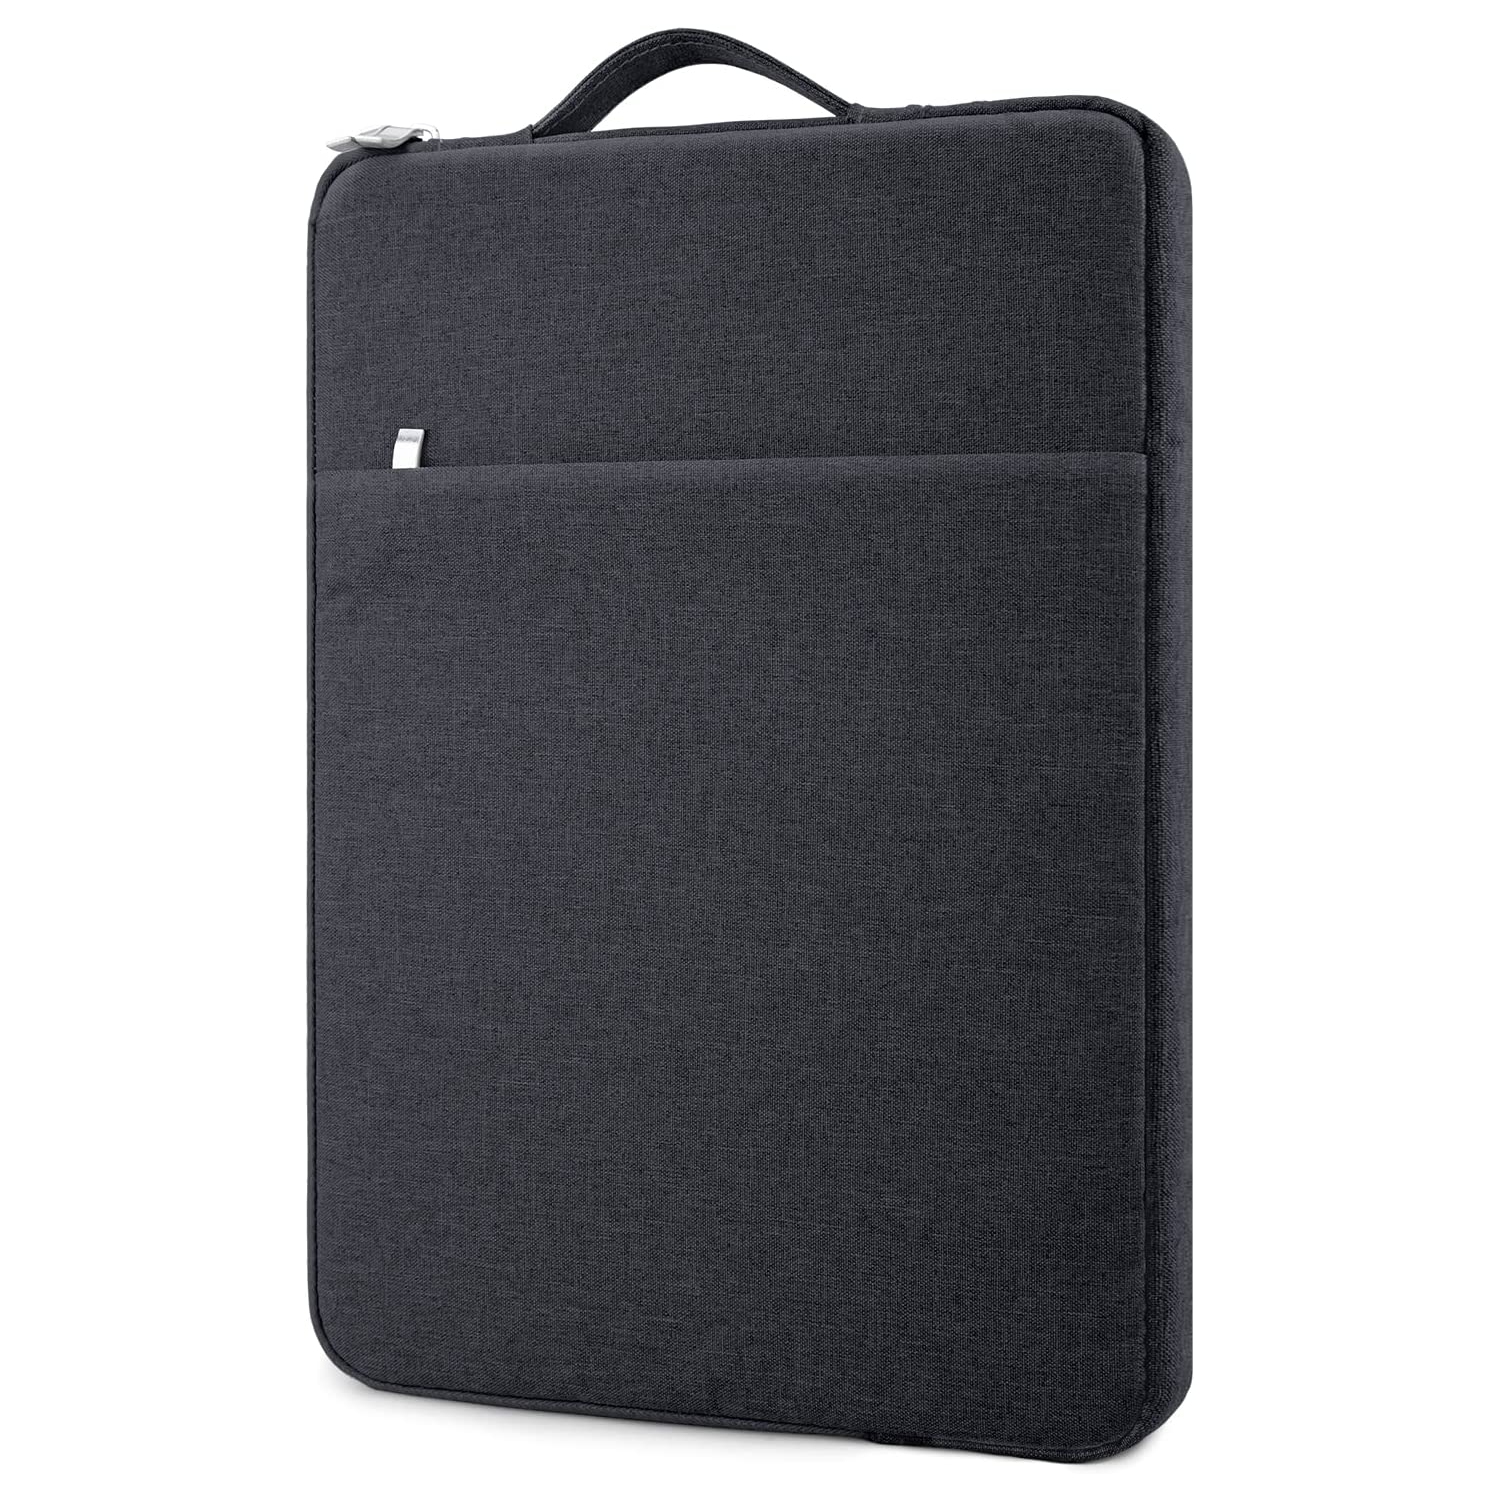 15 Inch Laptop Sleeve Case Protective Bag with Front Pocket Retractable Handle Computer Carrying Case for 15